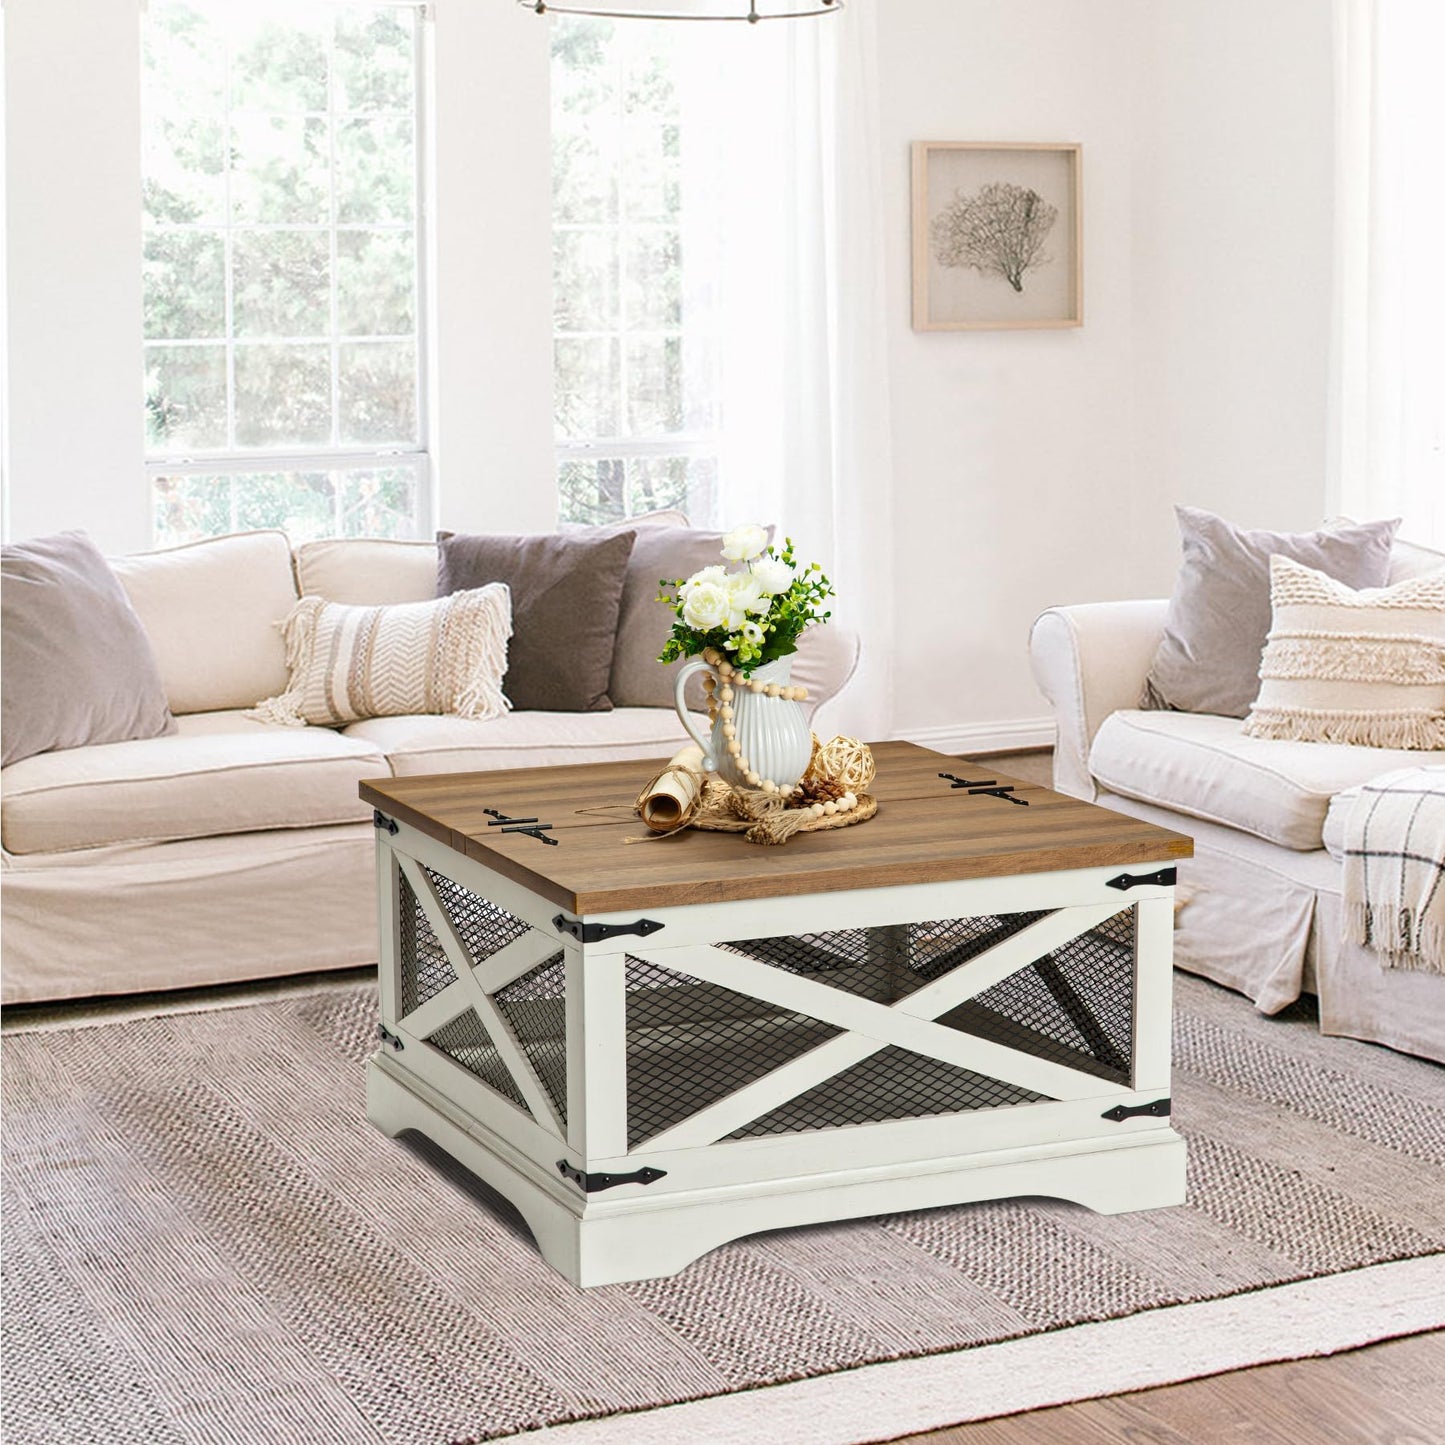 HOKYHOKY Square Coffee Table with Storage, 31.5" Farmhouse Wood Center Table with Hinged Lift Top, Industrial Coffee Table Rustic Rectangle Cocktail Table for Living Room (Distressed White)